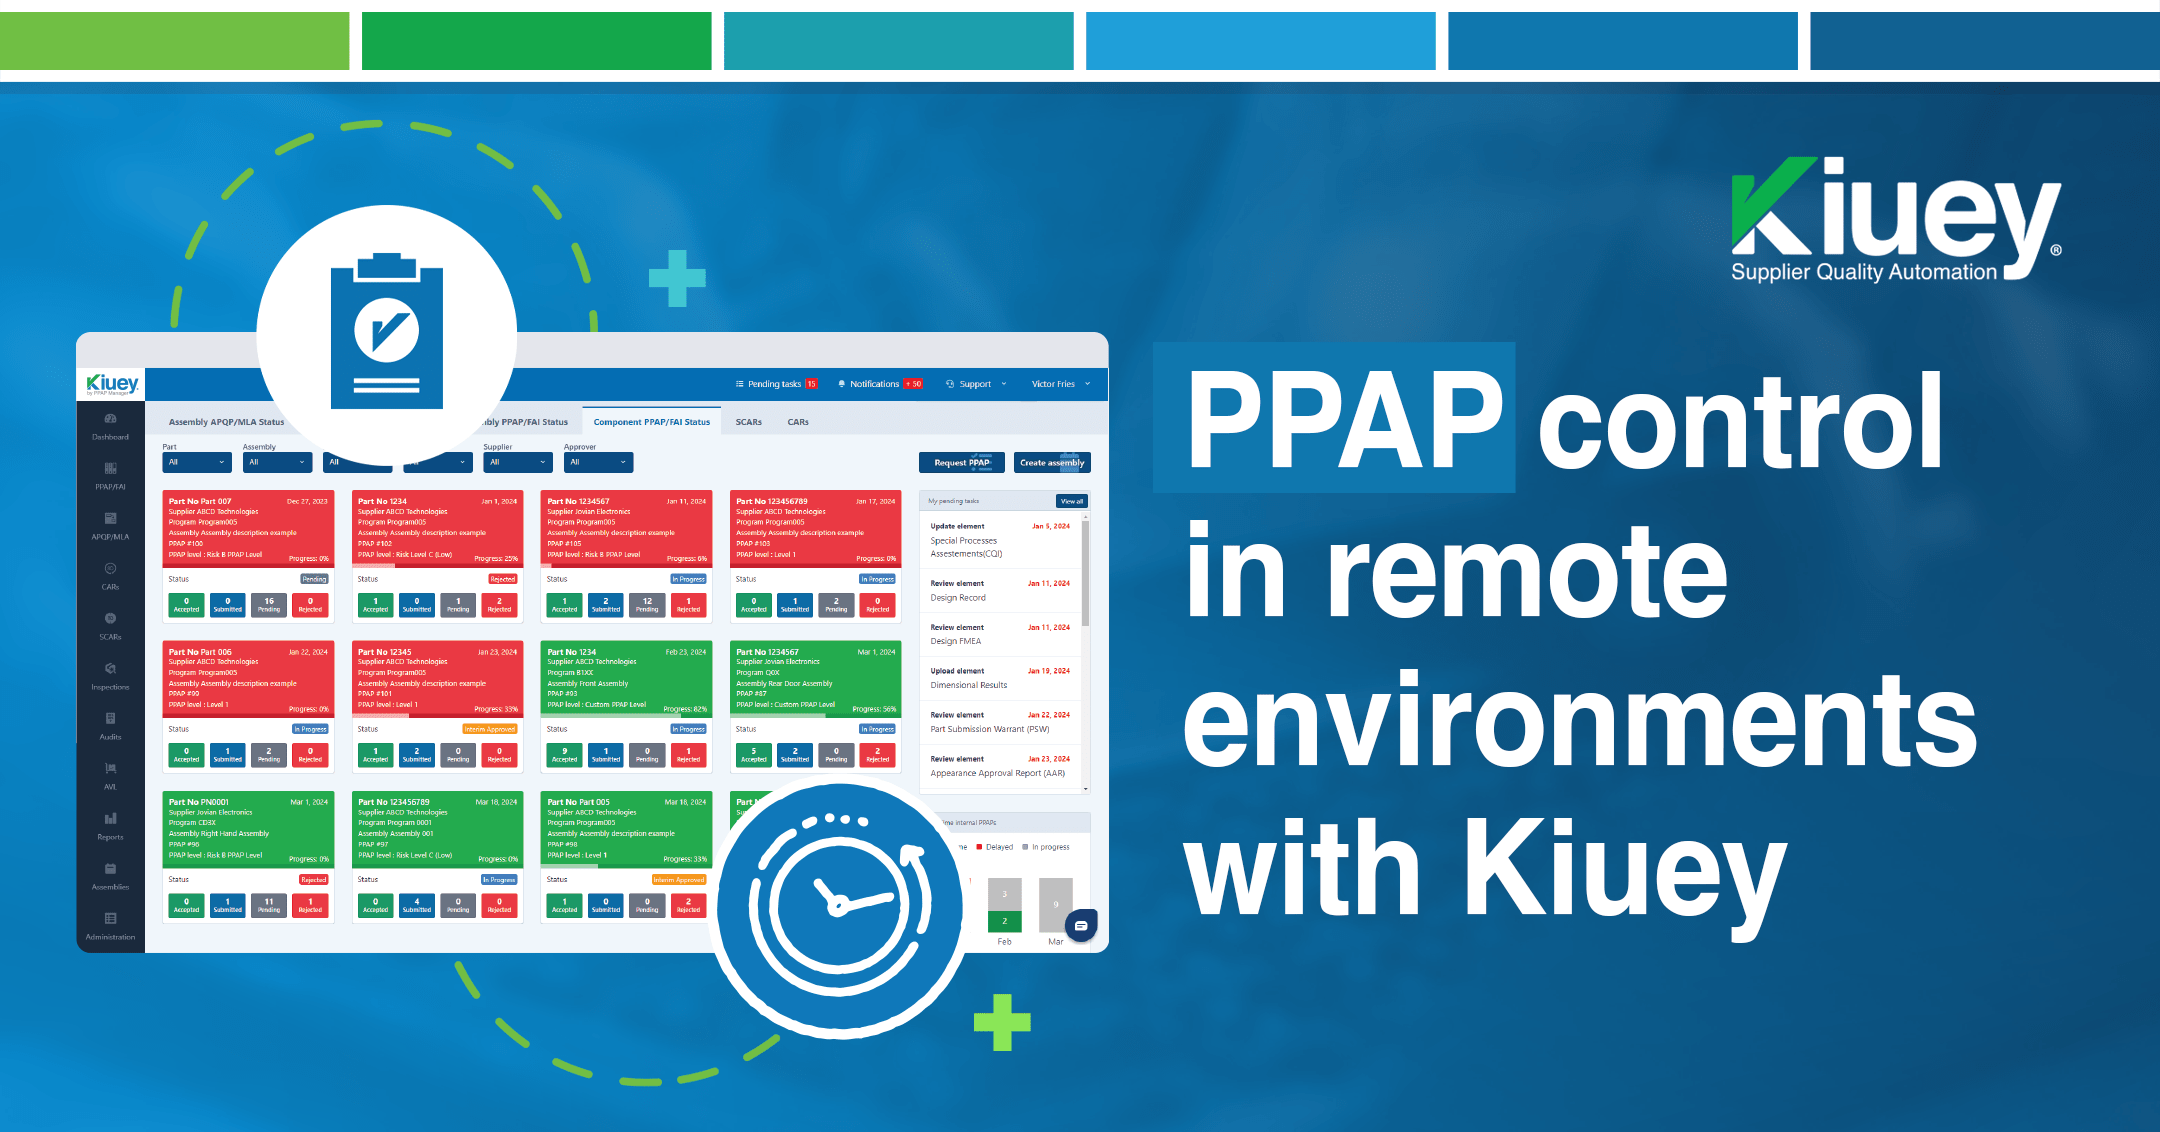 Kiuey’s PPAP Manager: The Key to Efficient Remote PPAP Management